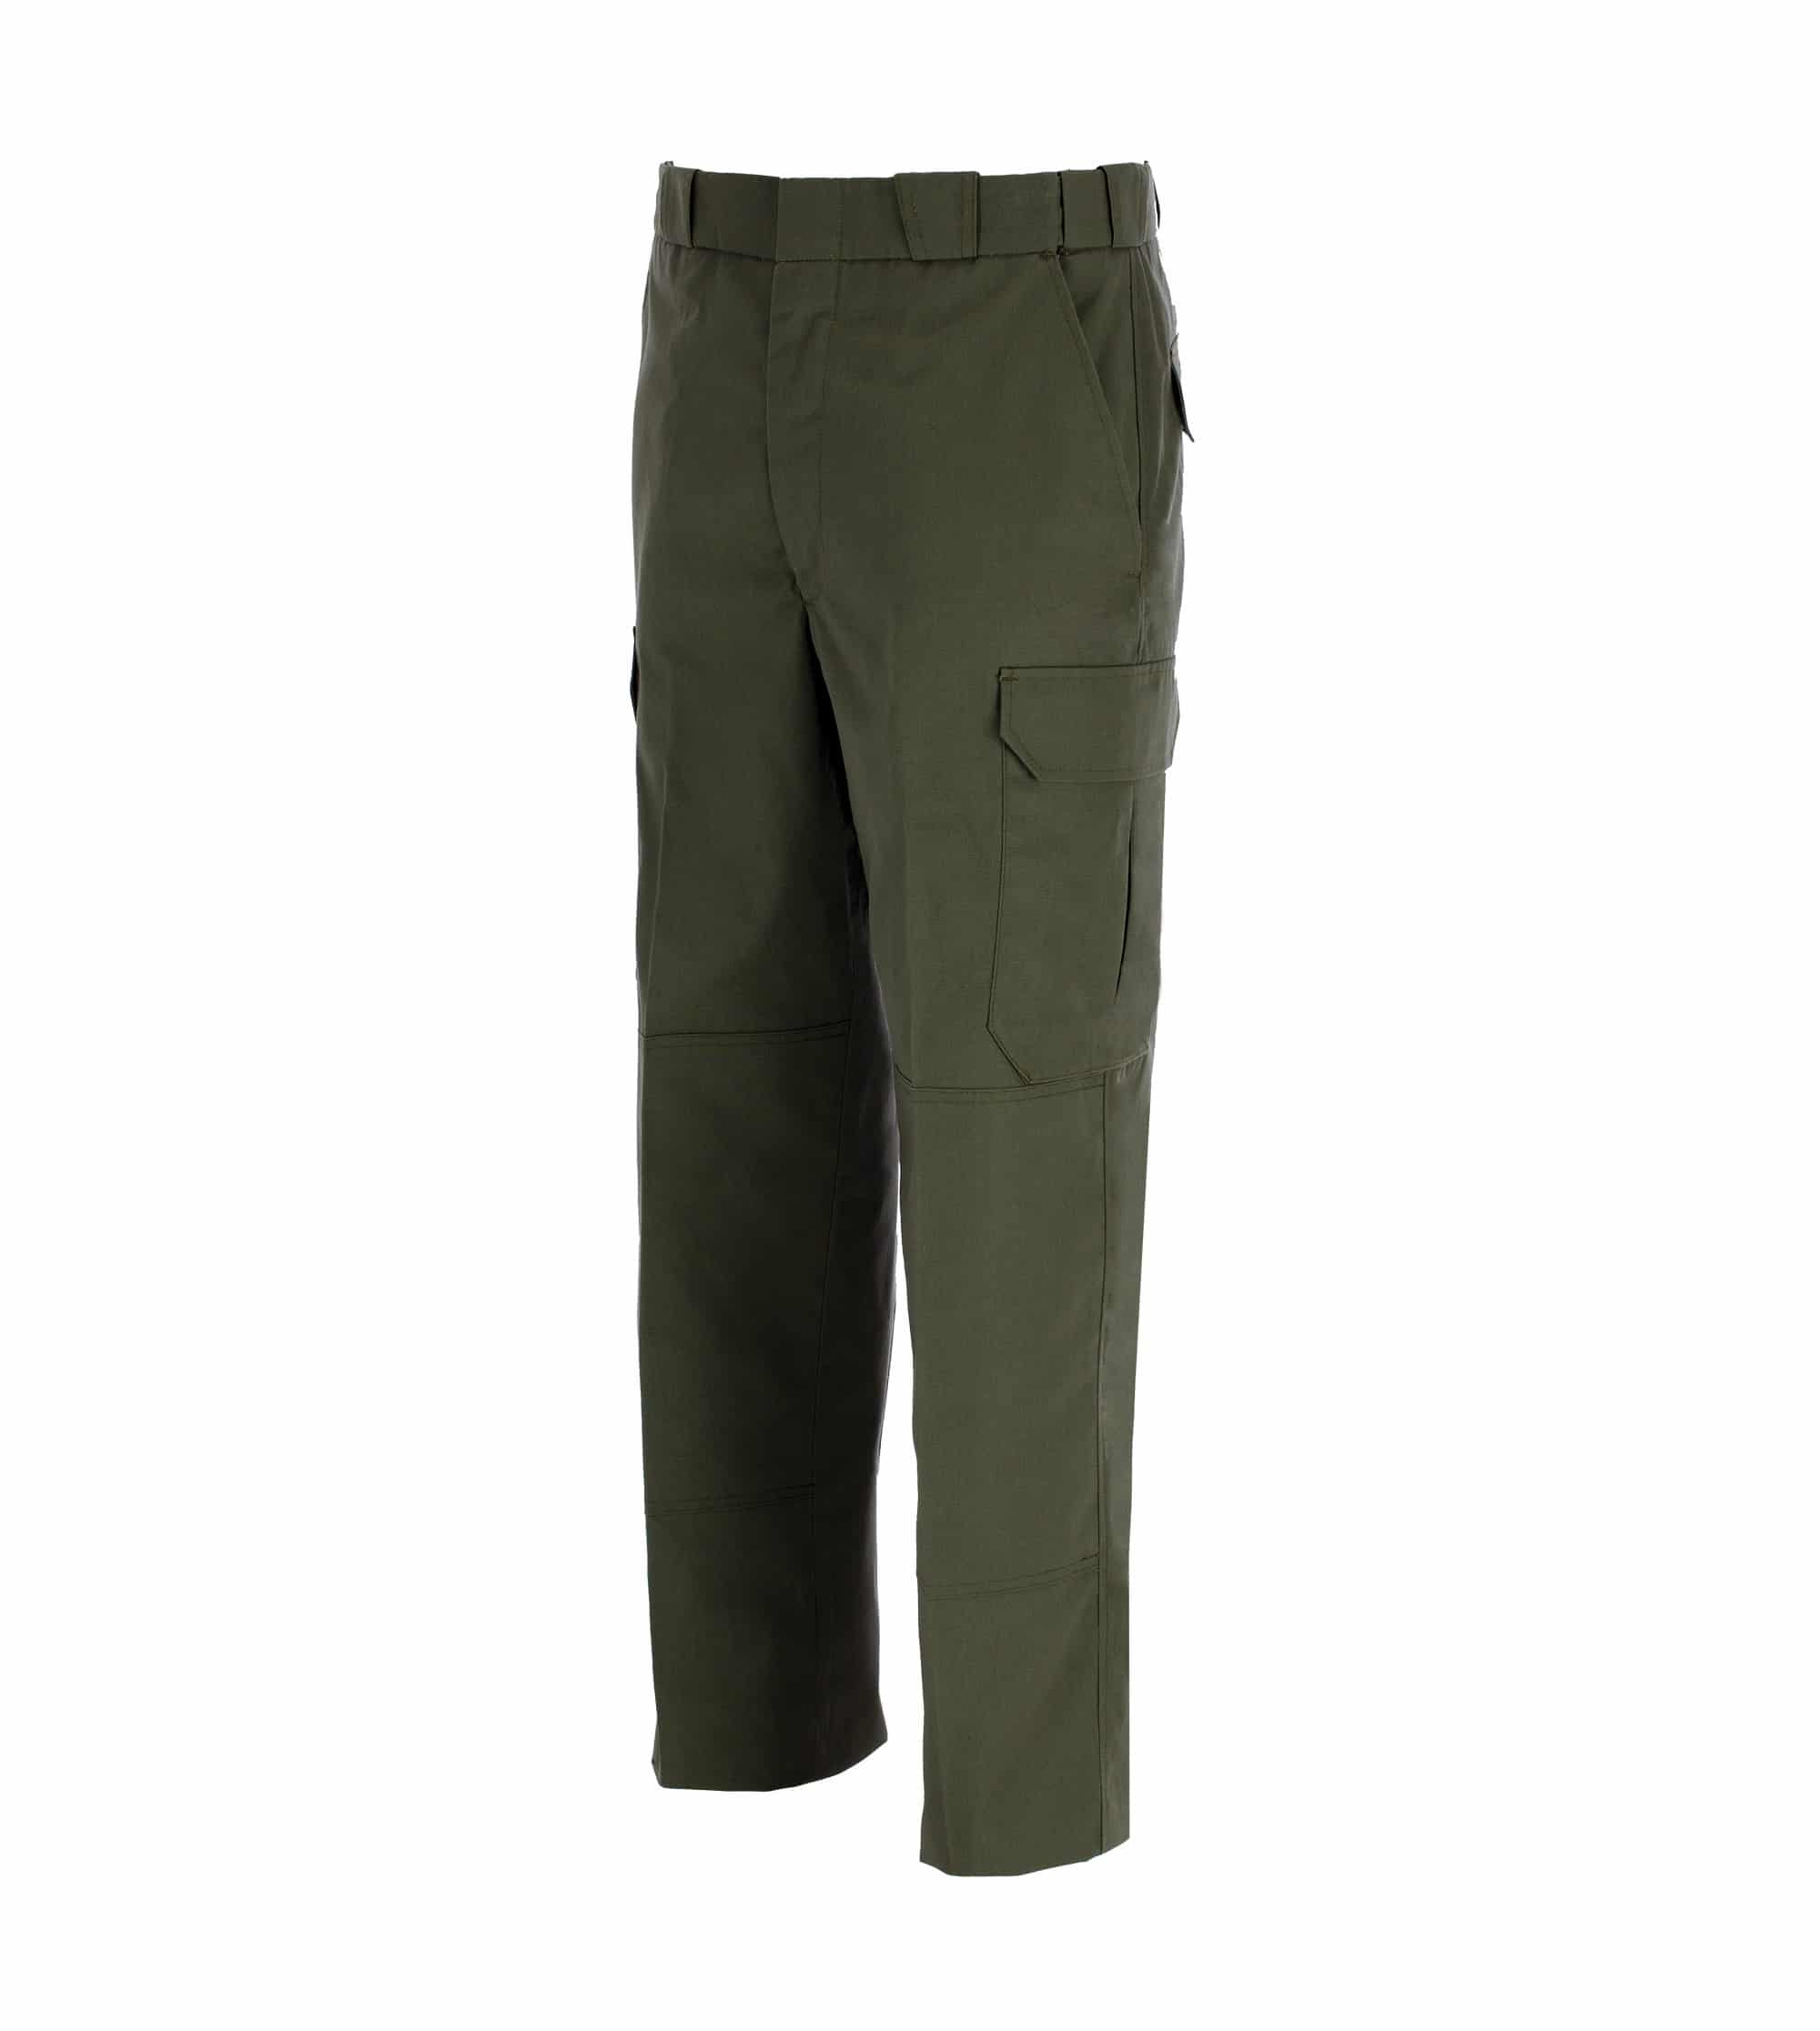 Weekday contrast stitch cargo trousers in khaki green | ASOS | Green cargo  pants outfit, Green cargo pants, Cargo trousers